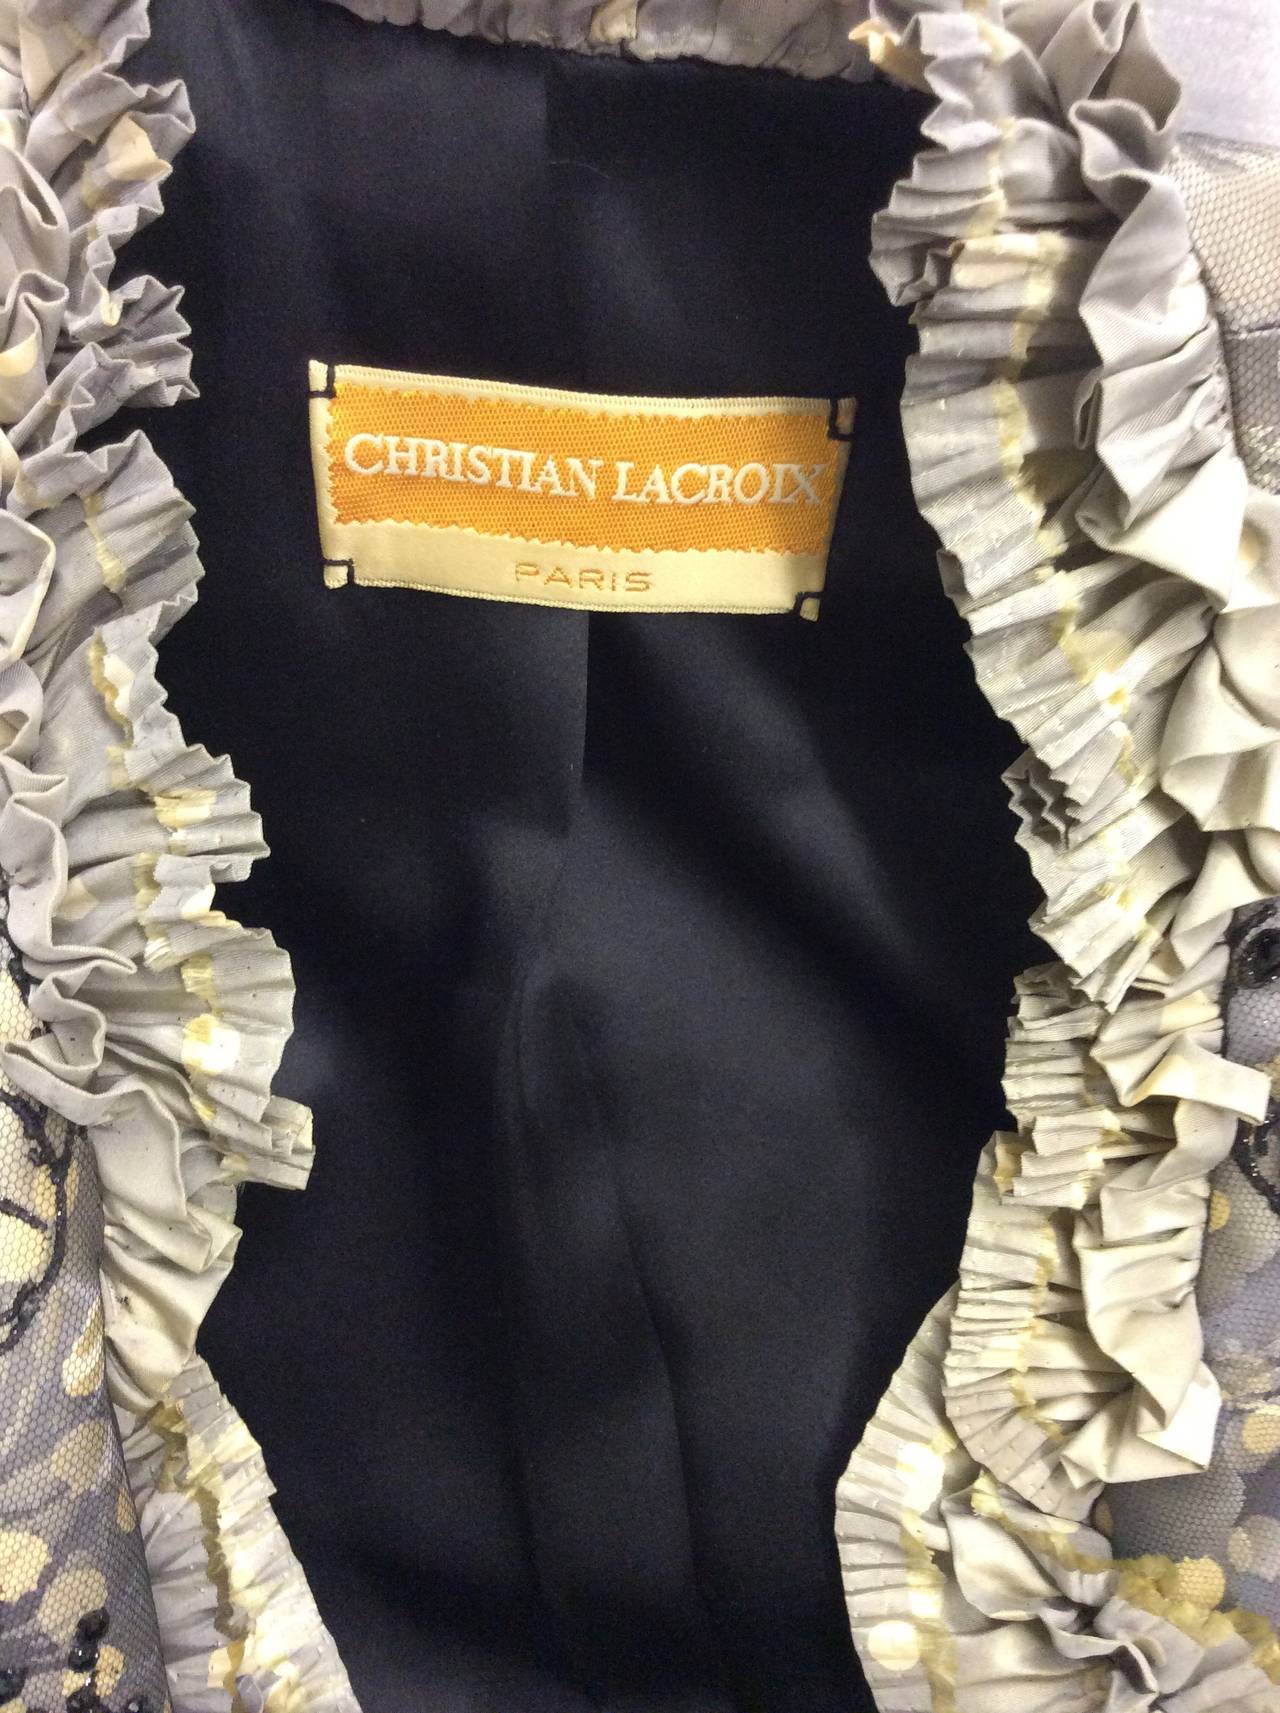 This is an incredible Christian Lacroix Silk floral beaded jacket
Fully lined in silk.